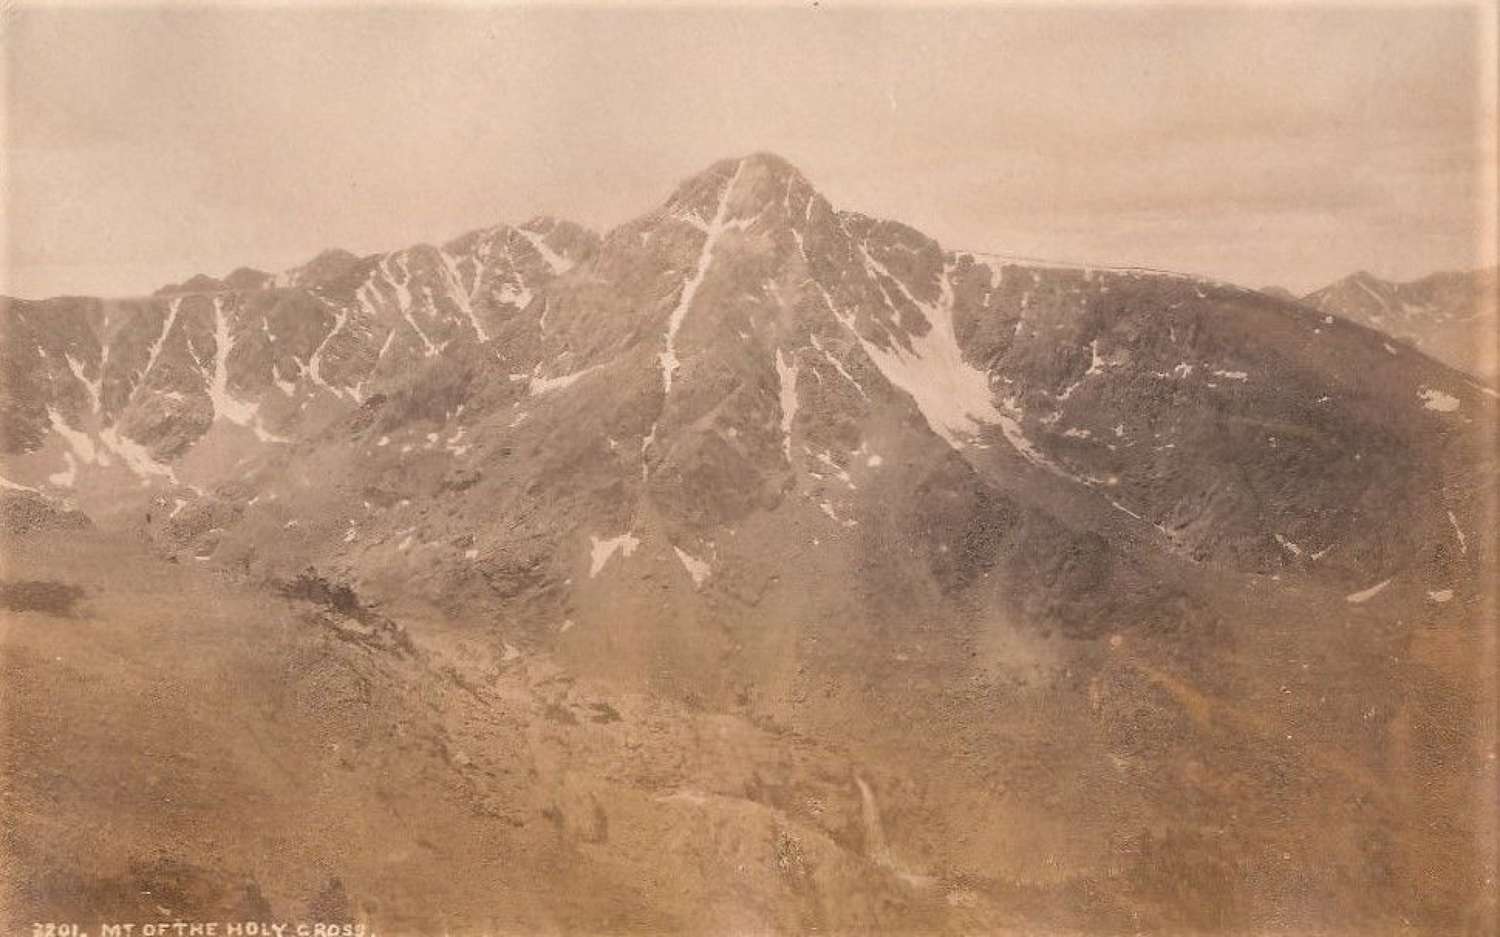 The Rocky Mountains The Holy Gross U.S.A  C1880